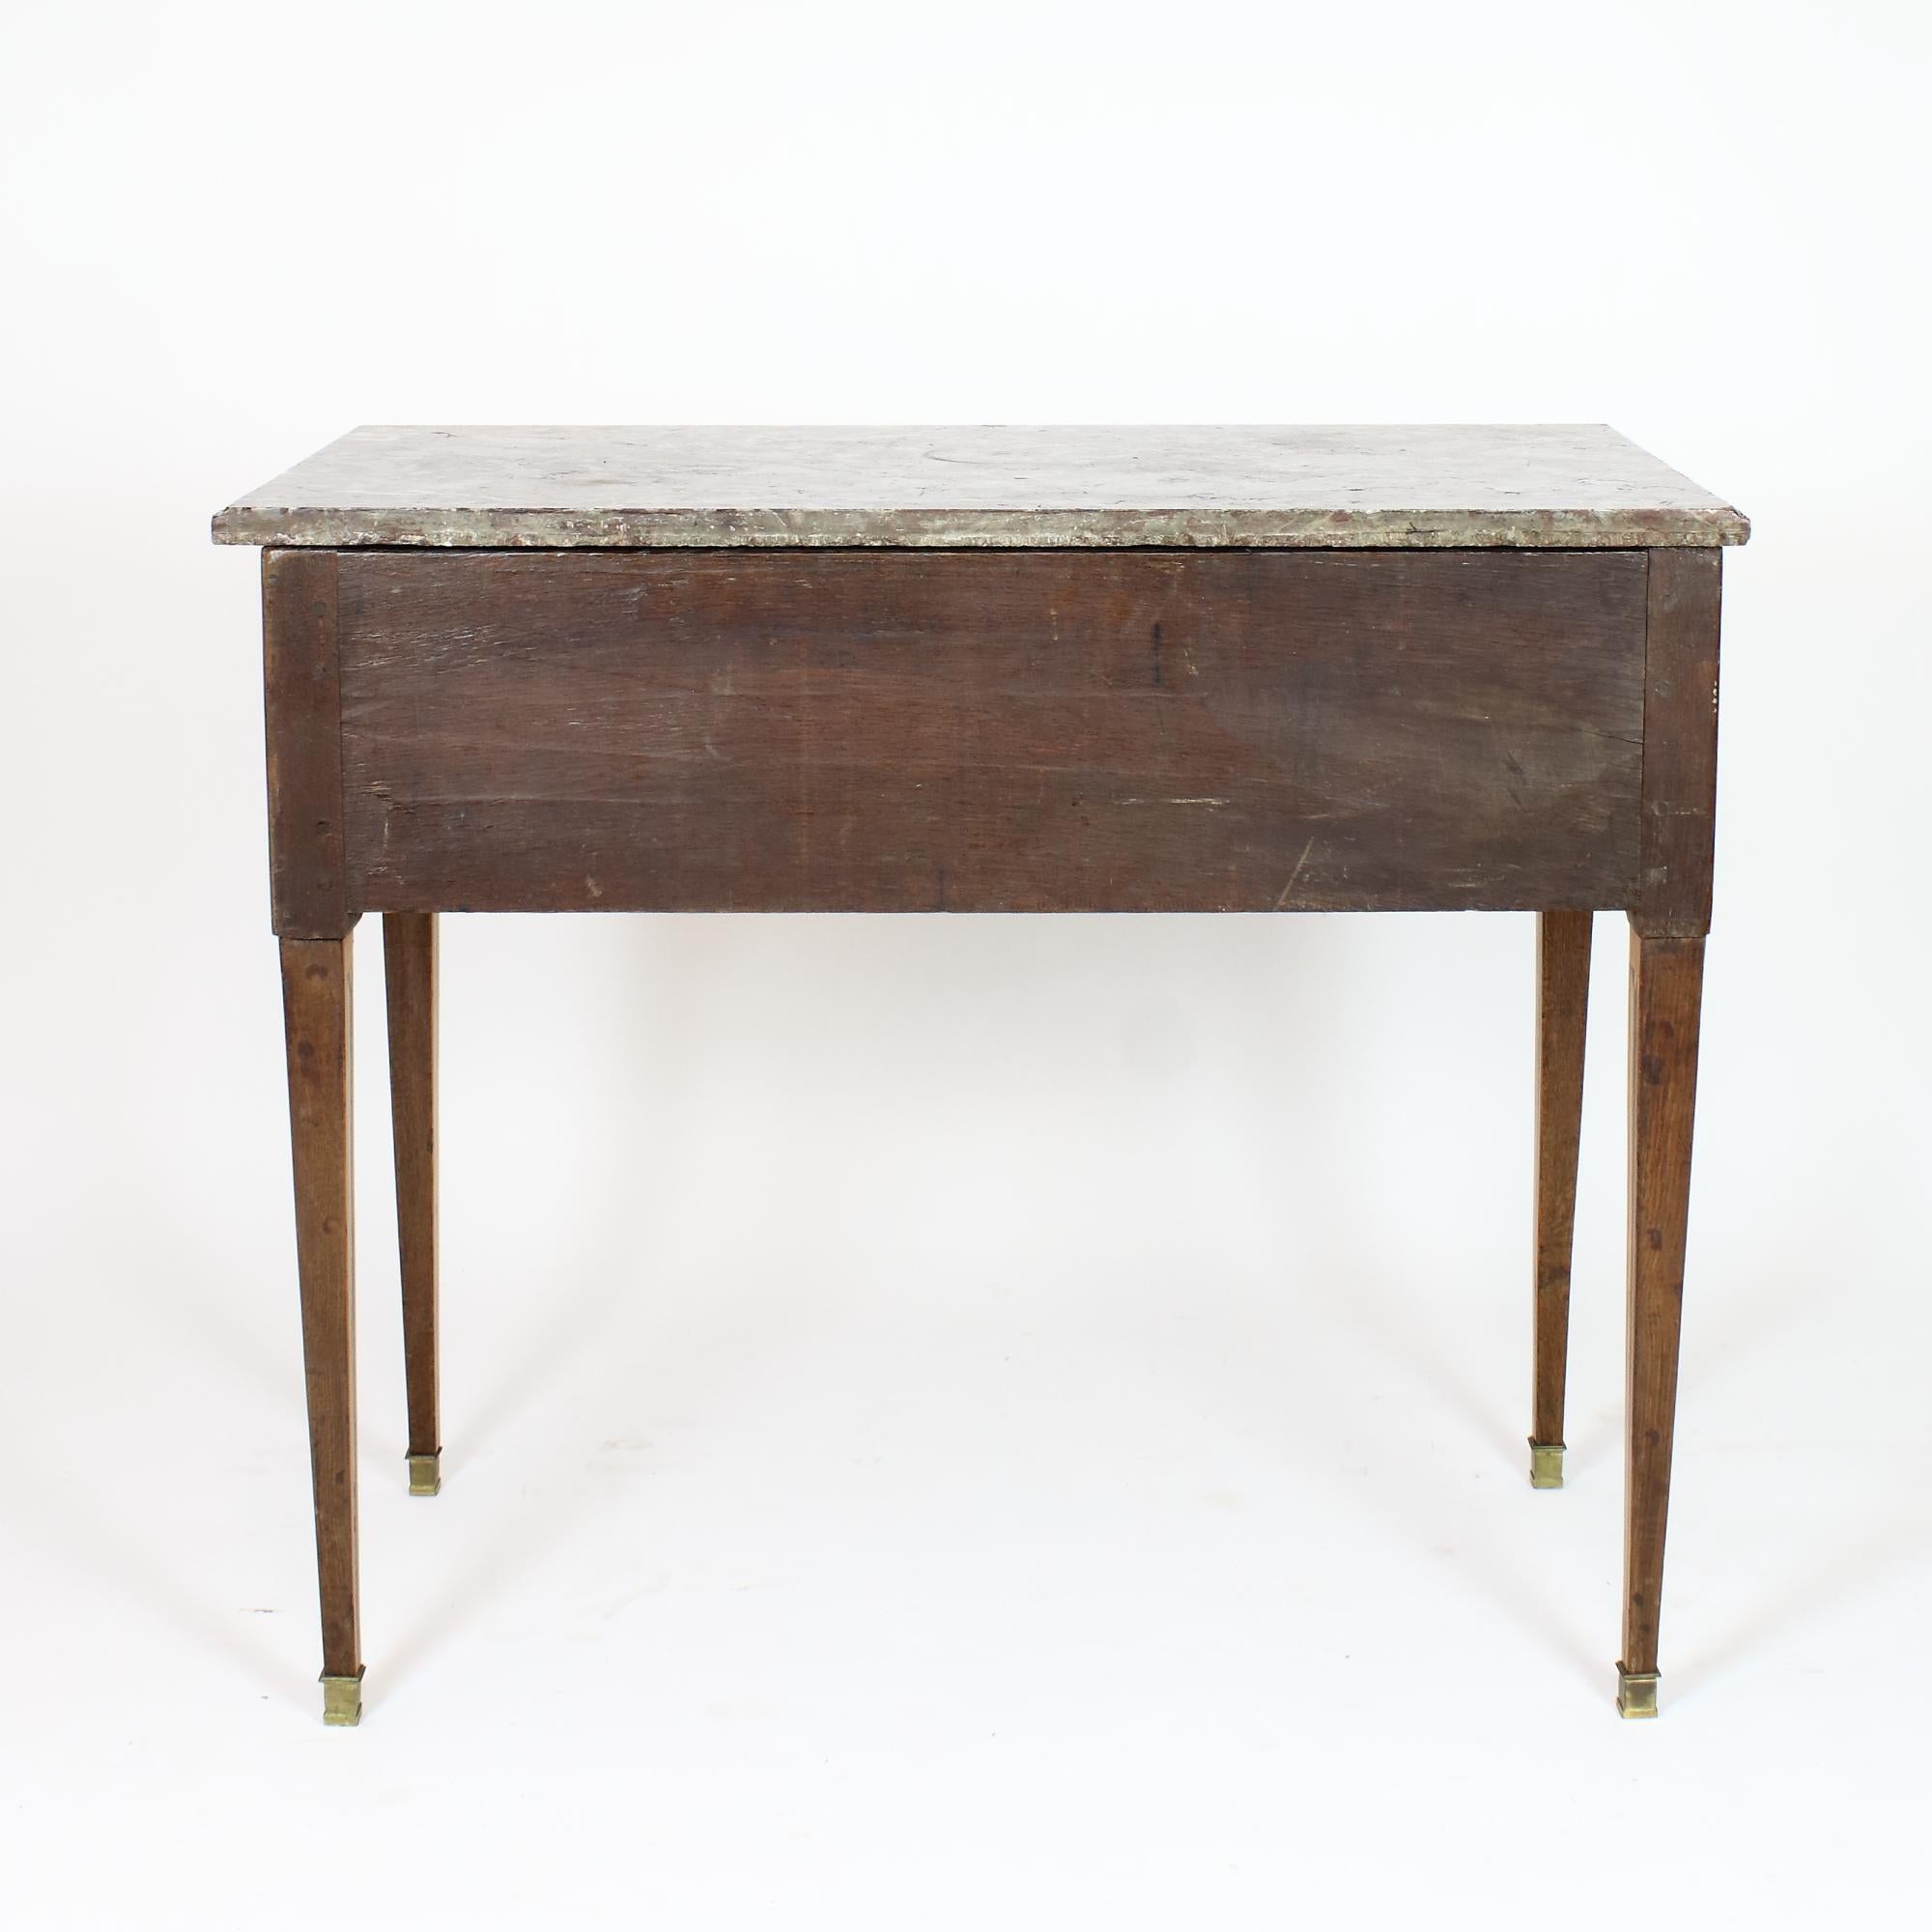 Bronze 18th Century French Louis XVI Neoclassical Marquetry Console Table For Sale